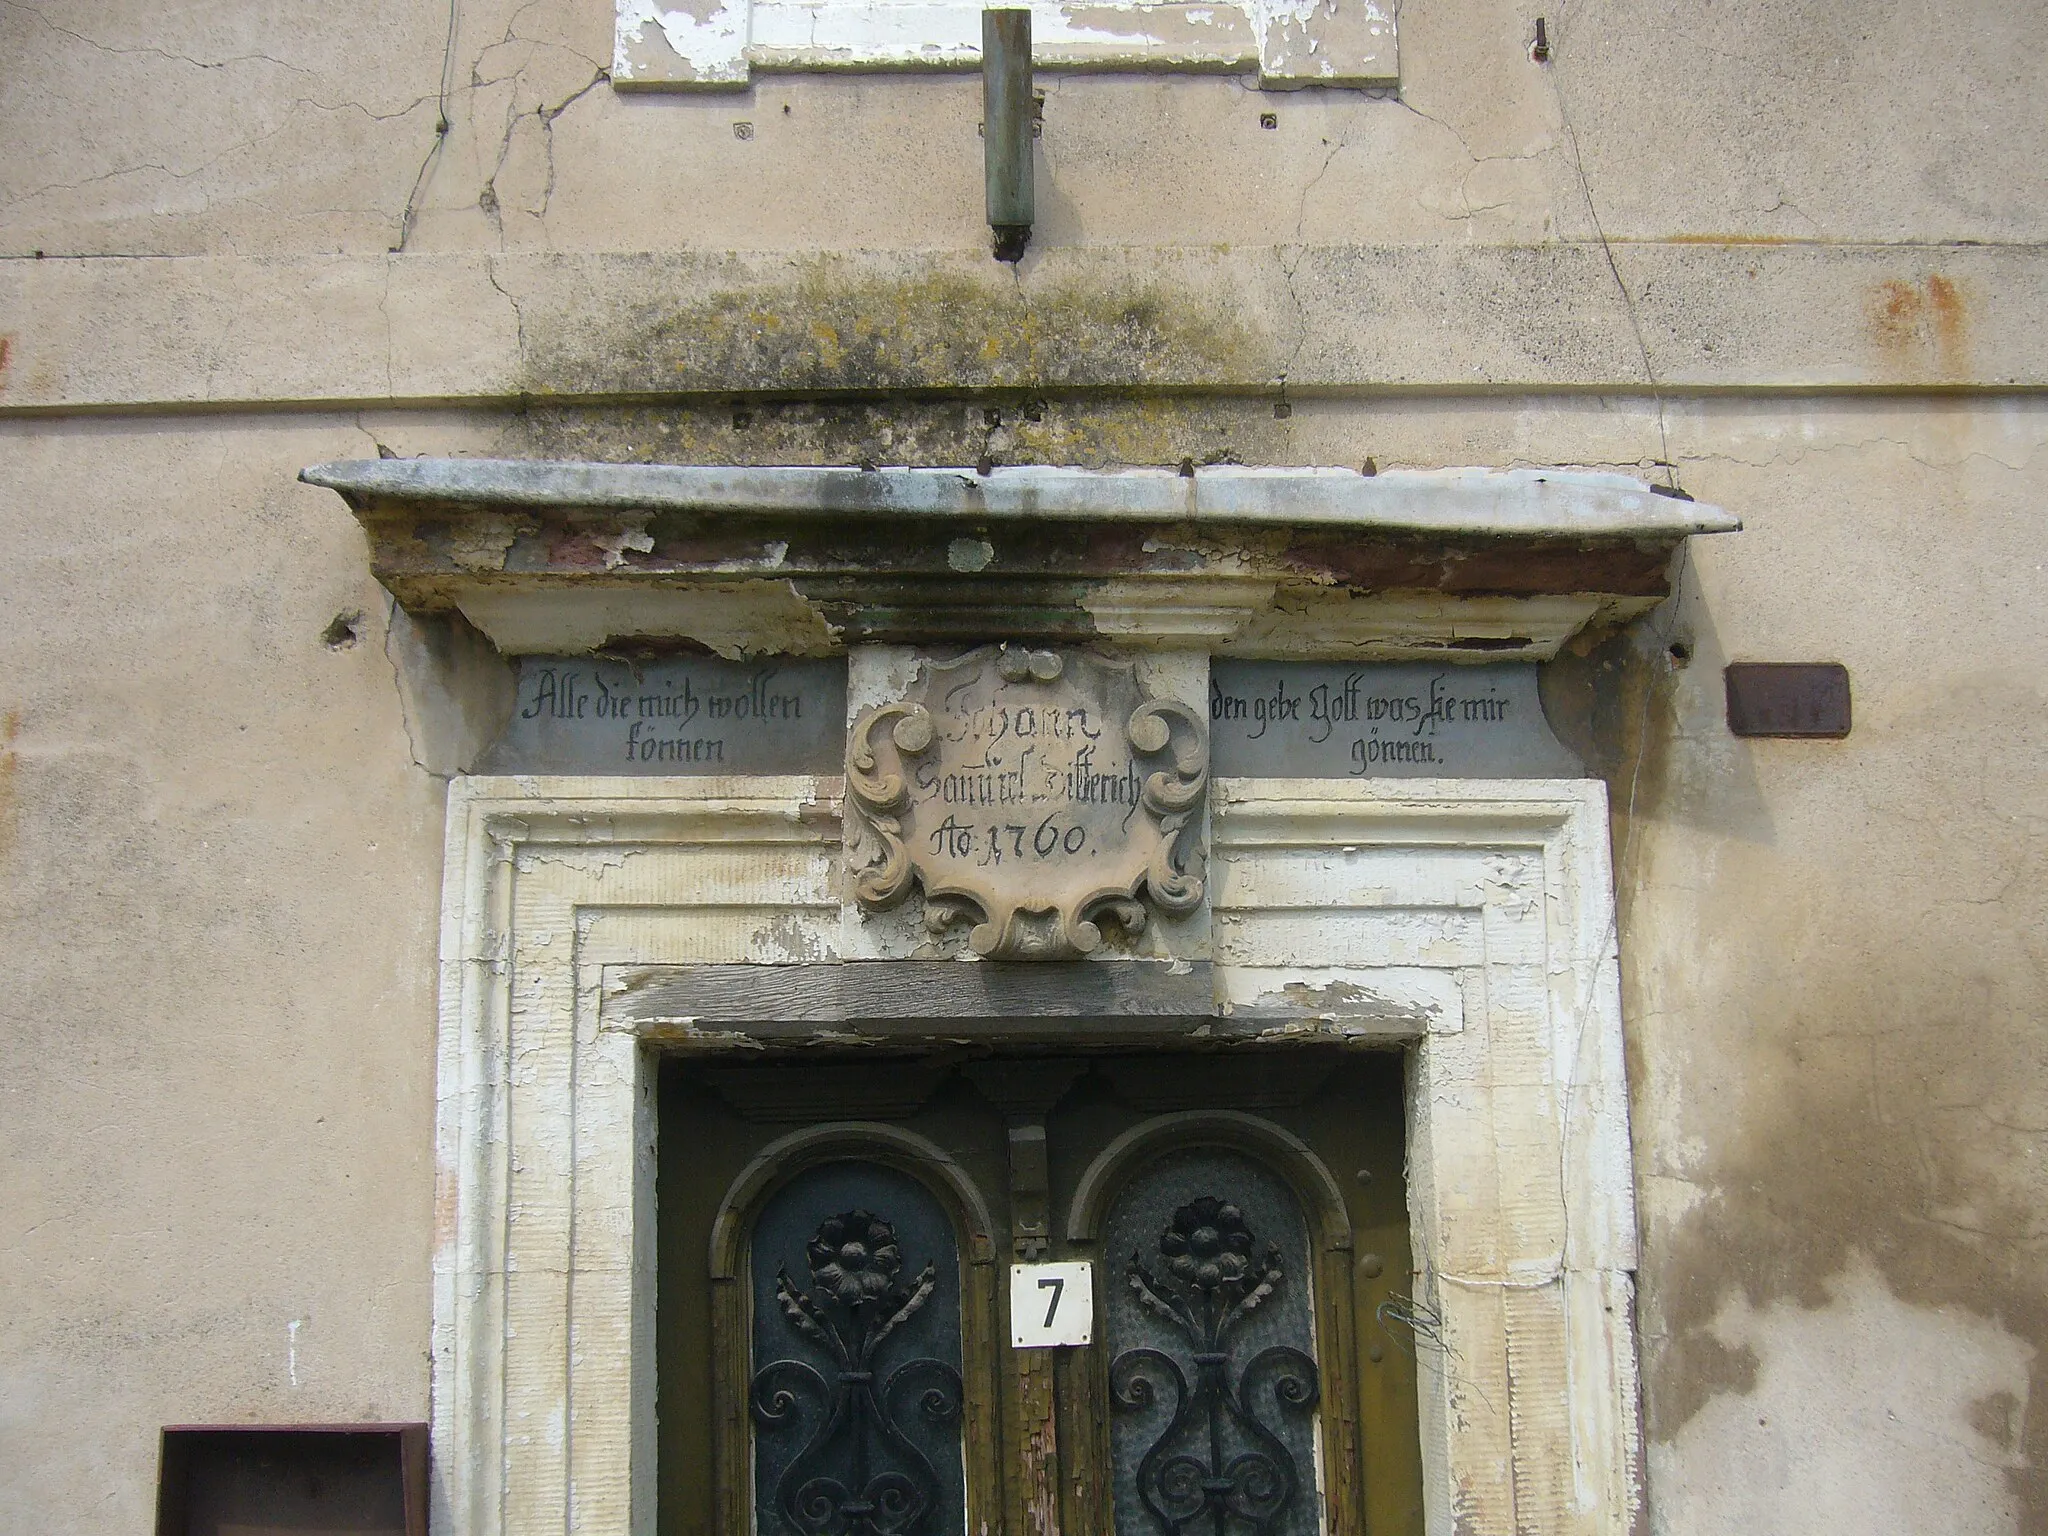 Photo showing: Inscription on a house in Ritteburg, Thuringia, Germany